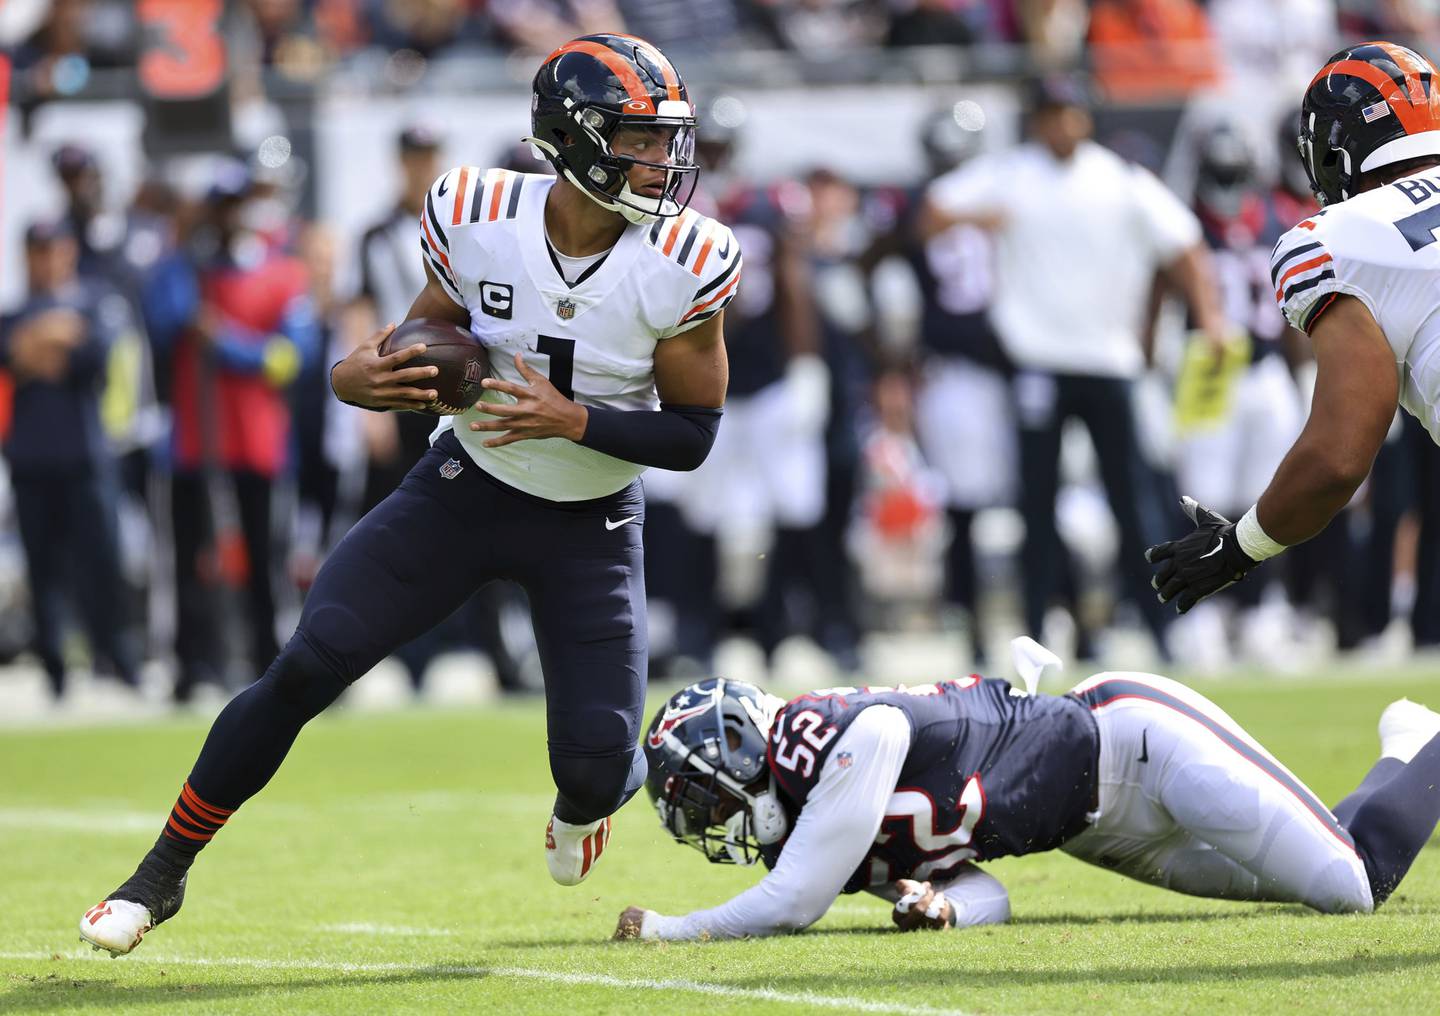 Bears quarterback Justin Fields (1) scrambles out of the pocket before running for a first down against the Texans on Sept. 25, 2022, at Soldier Field.